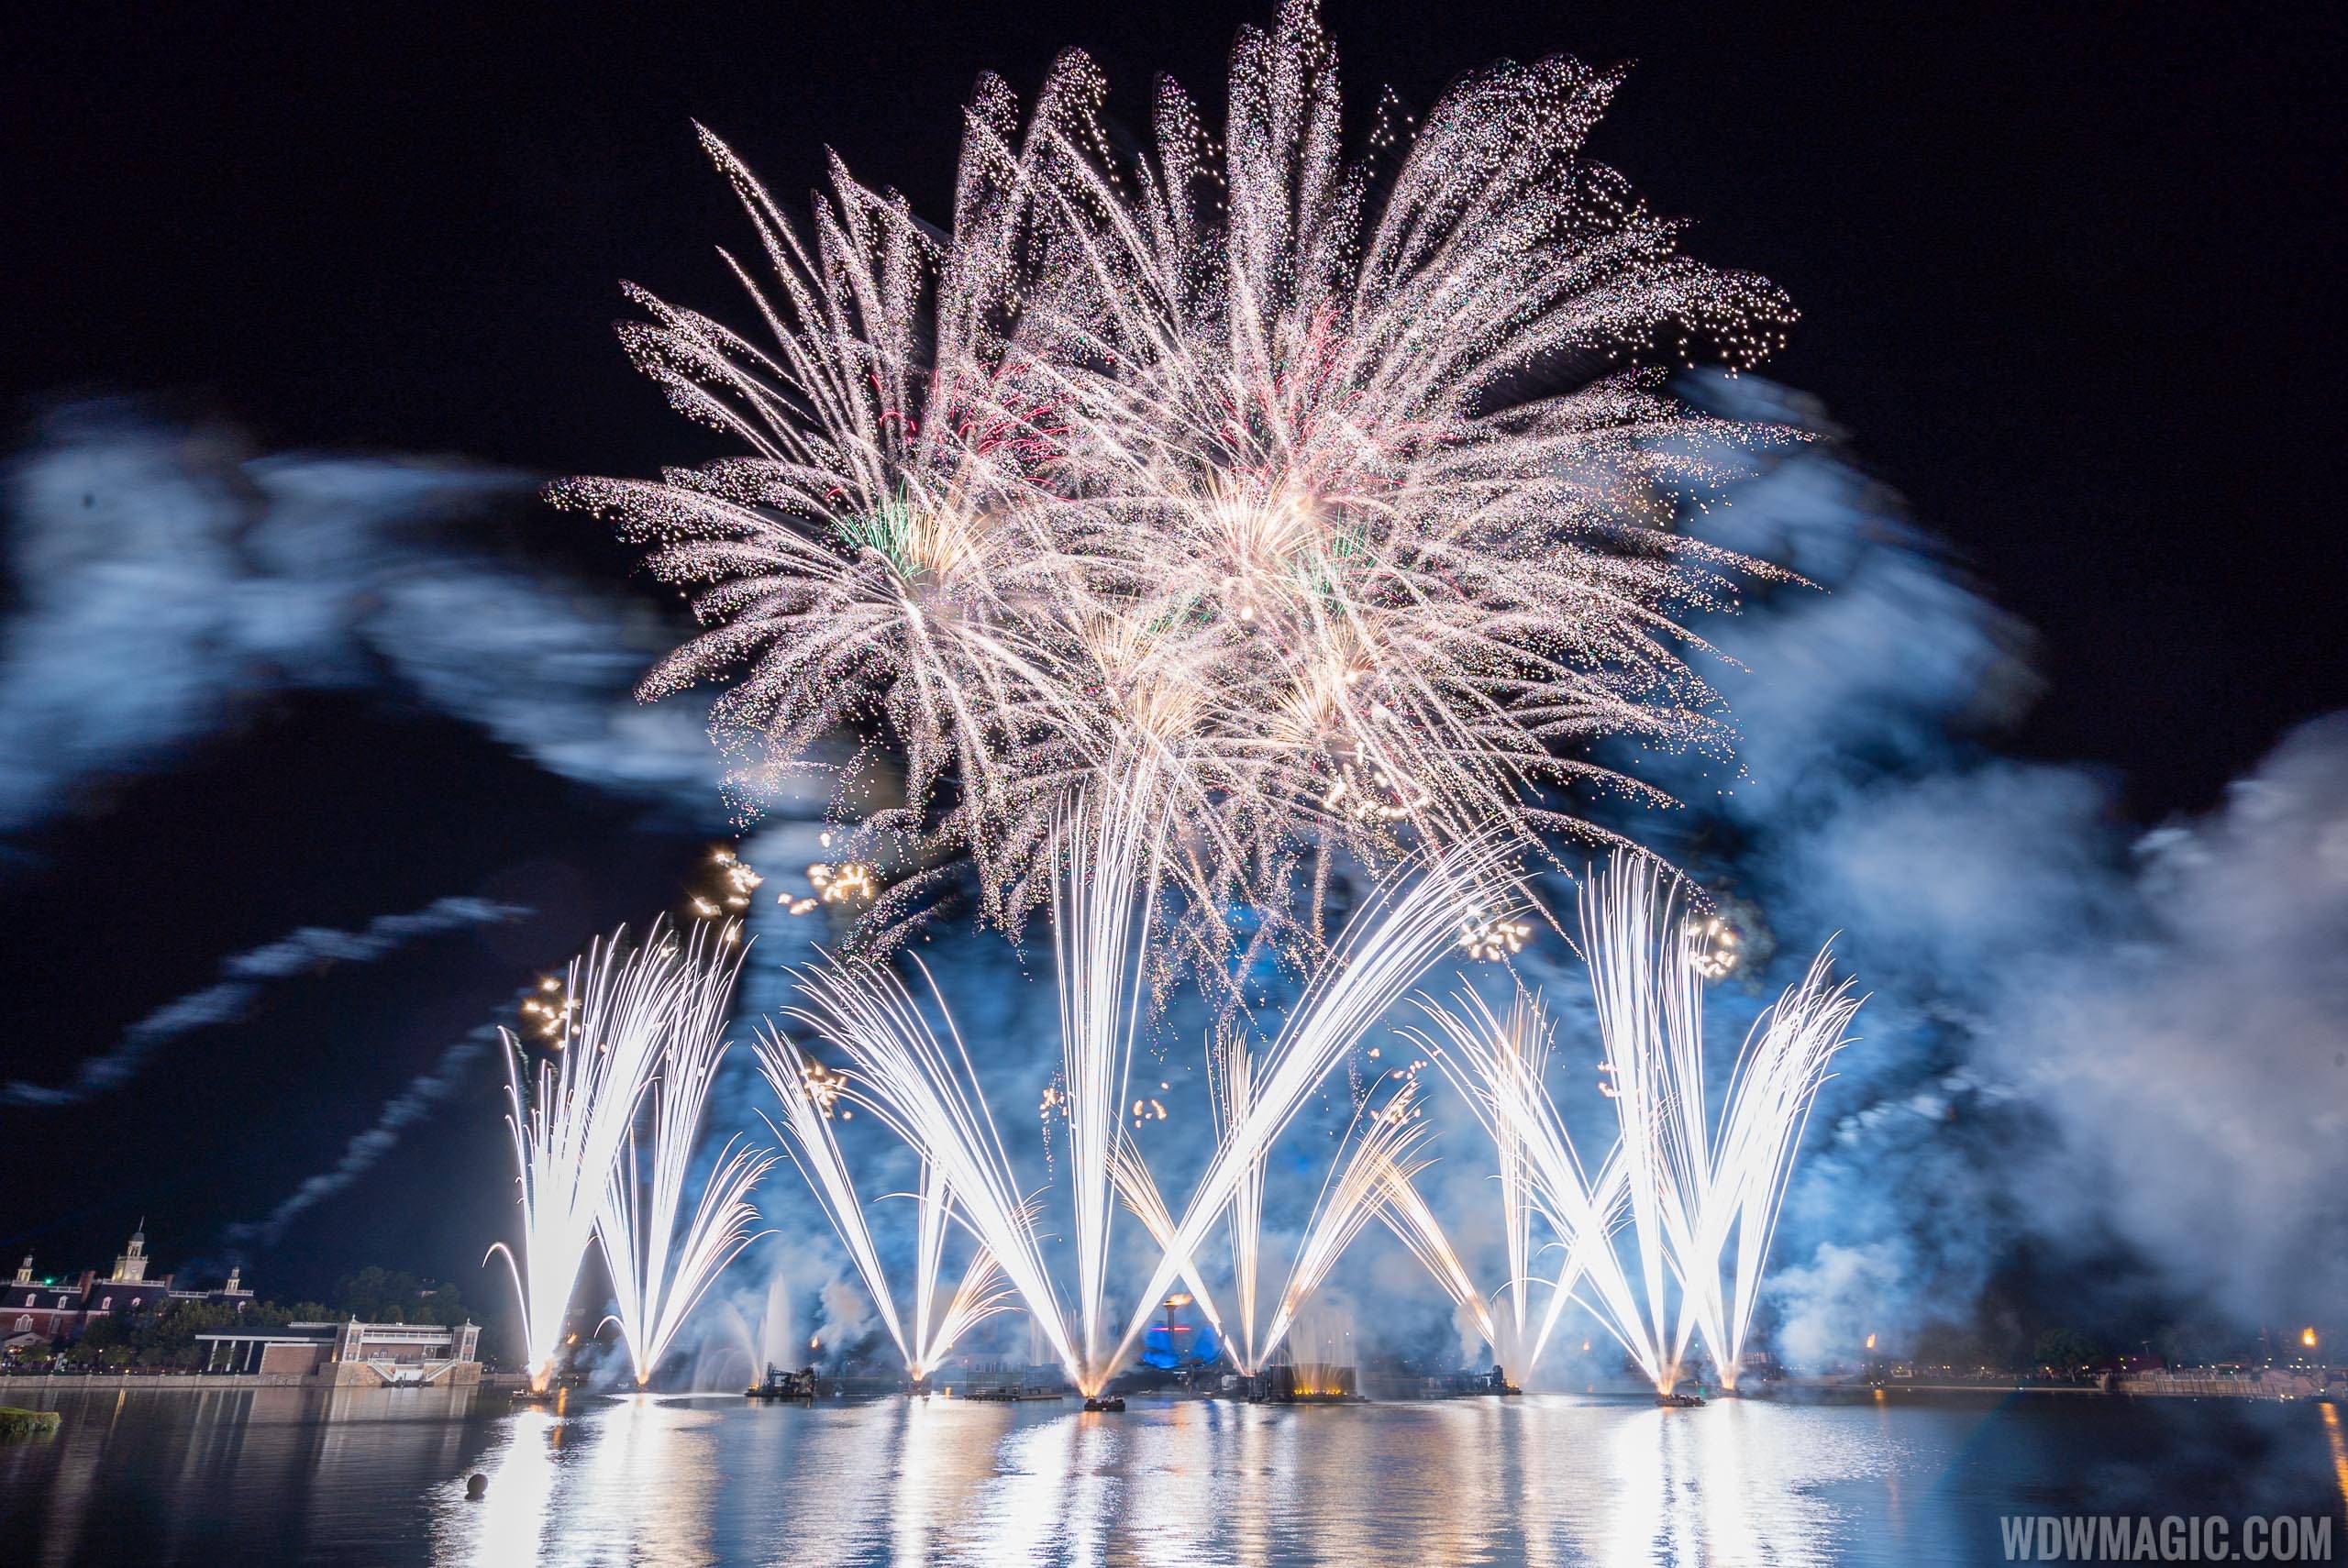 Two firework shows will ring in 2023 at Walt Disney World